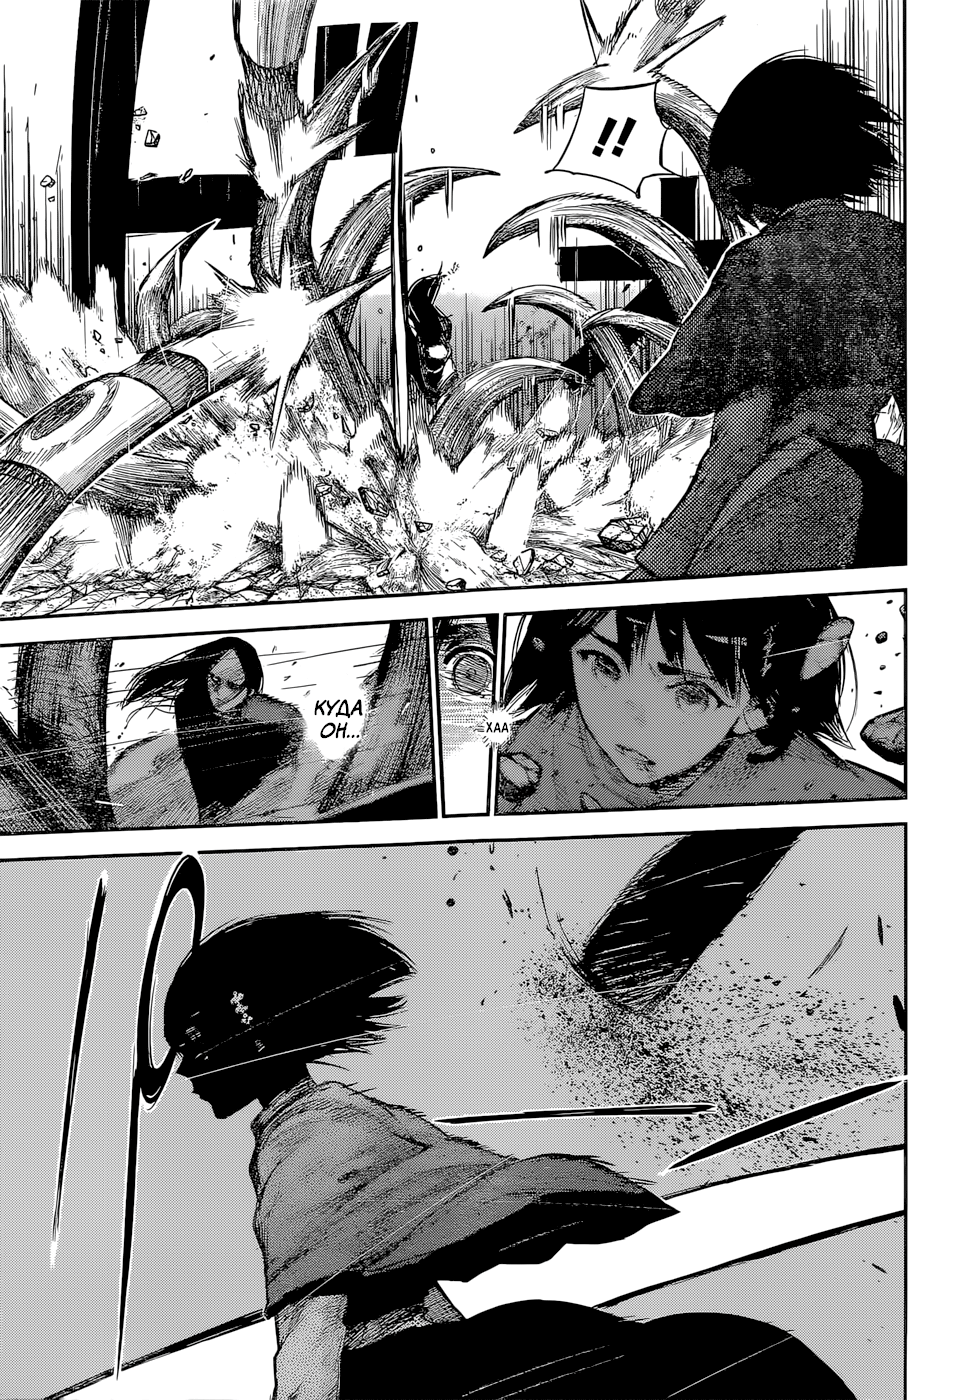 Tokyo ghoul re chapter 125